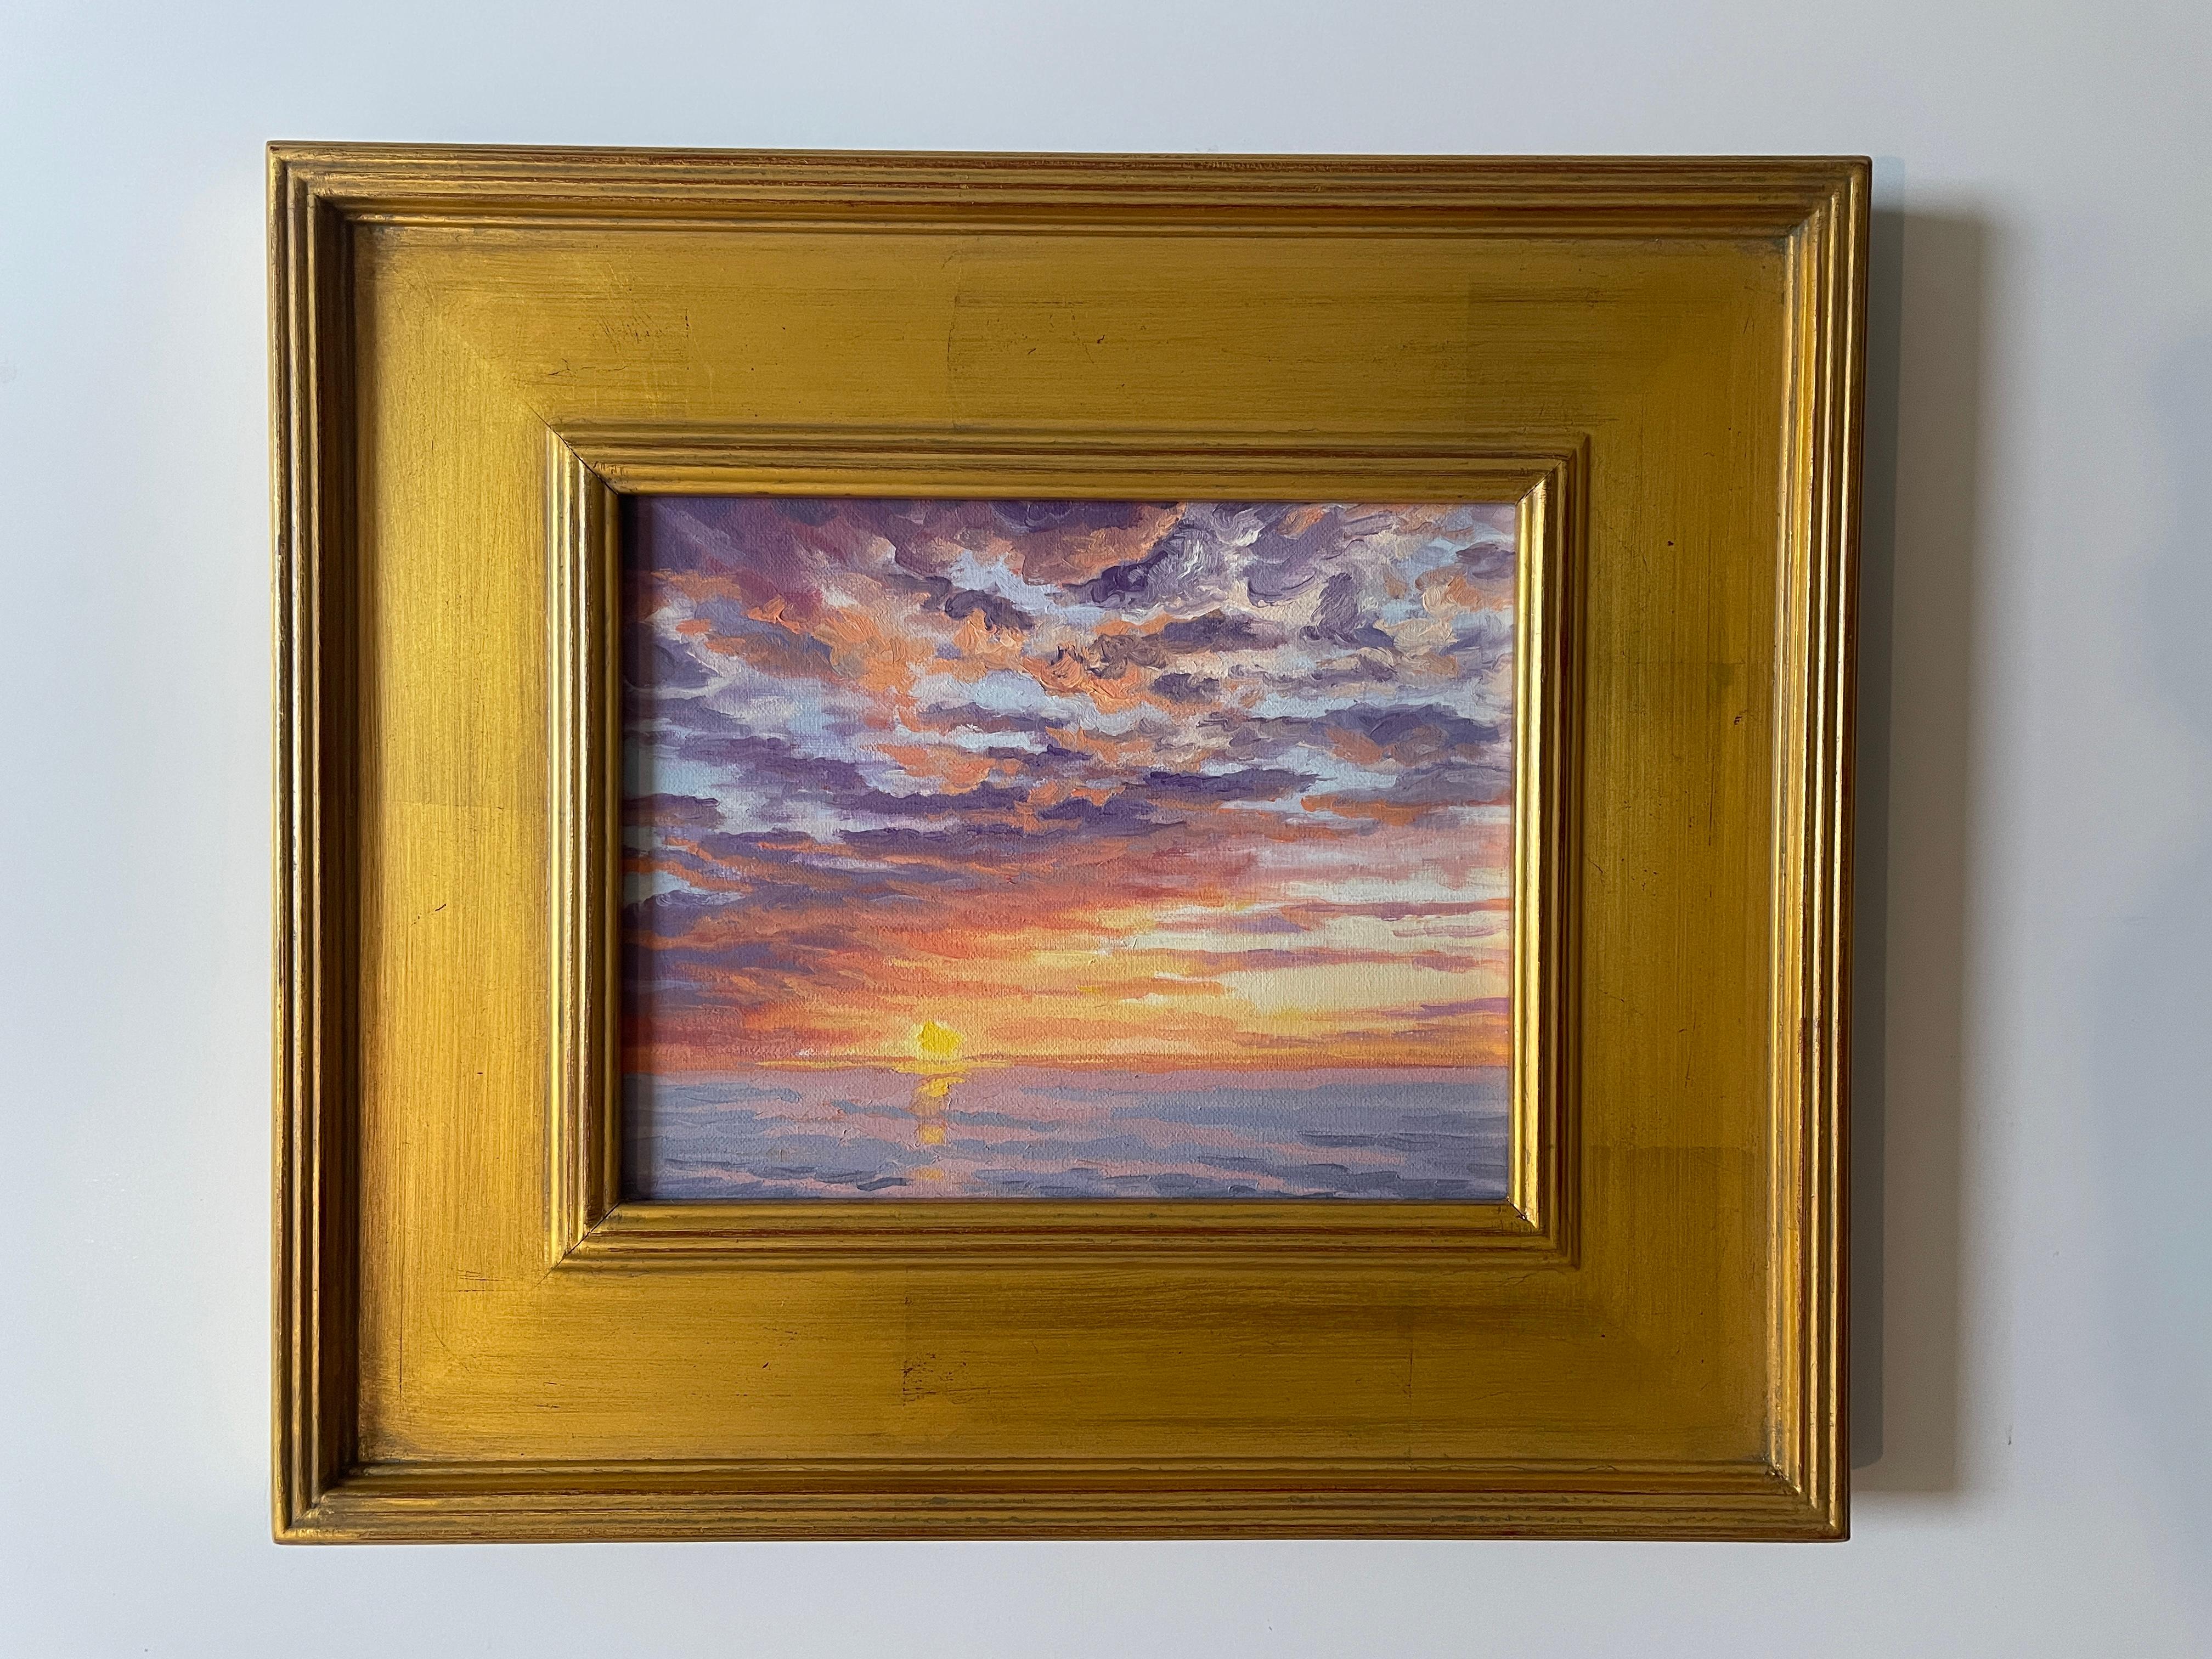 As the Sun Drops Below the Horizon. Title - Last Light of Day - Painting by Carl Scorza